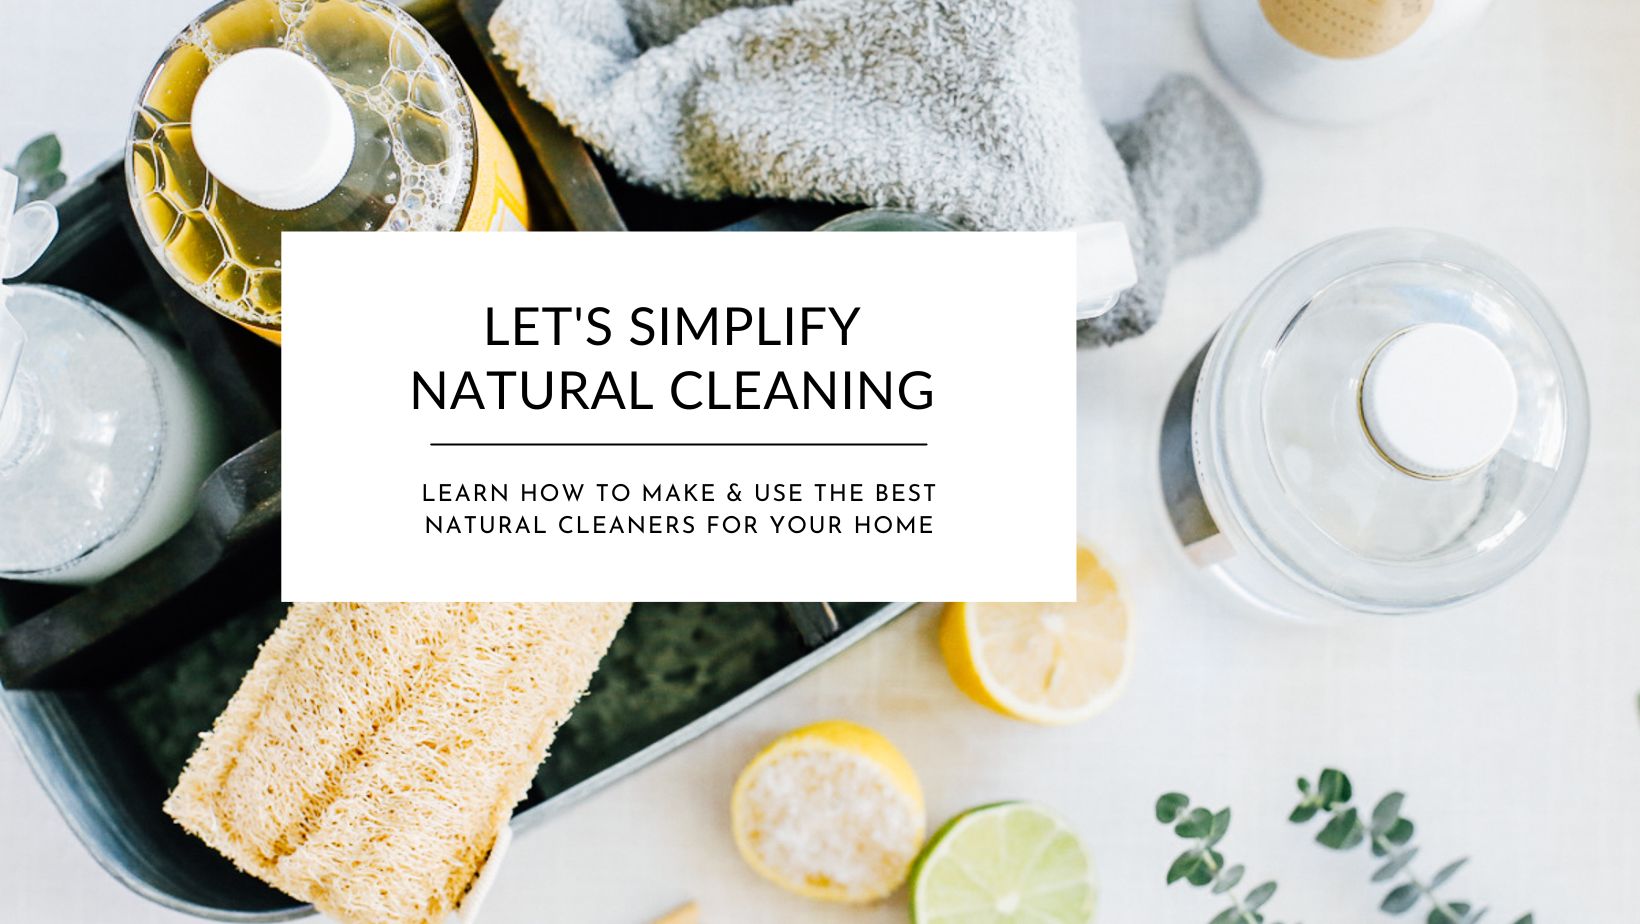 Live Simply Natural Cleaning